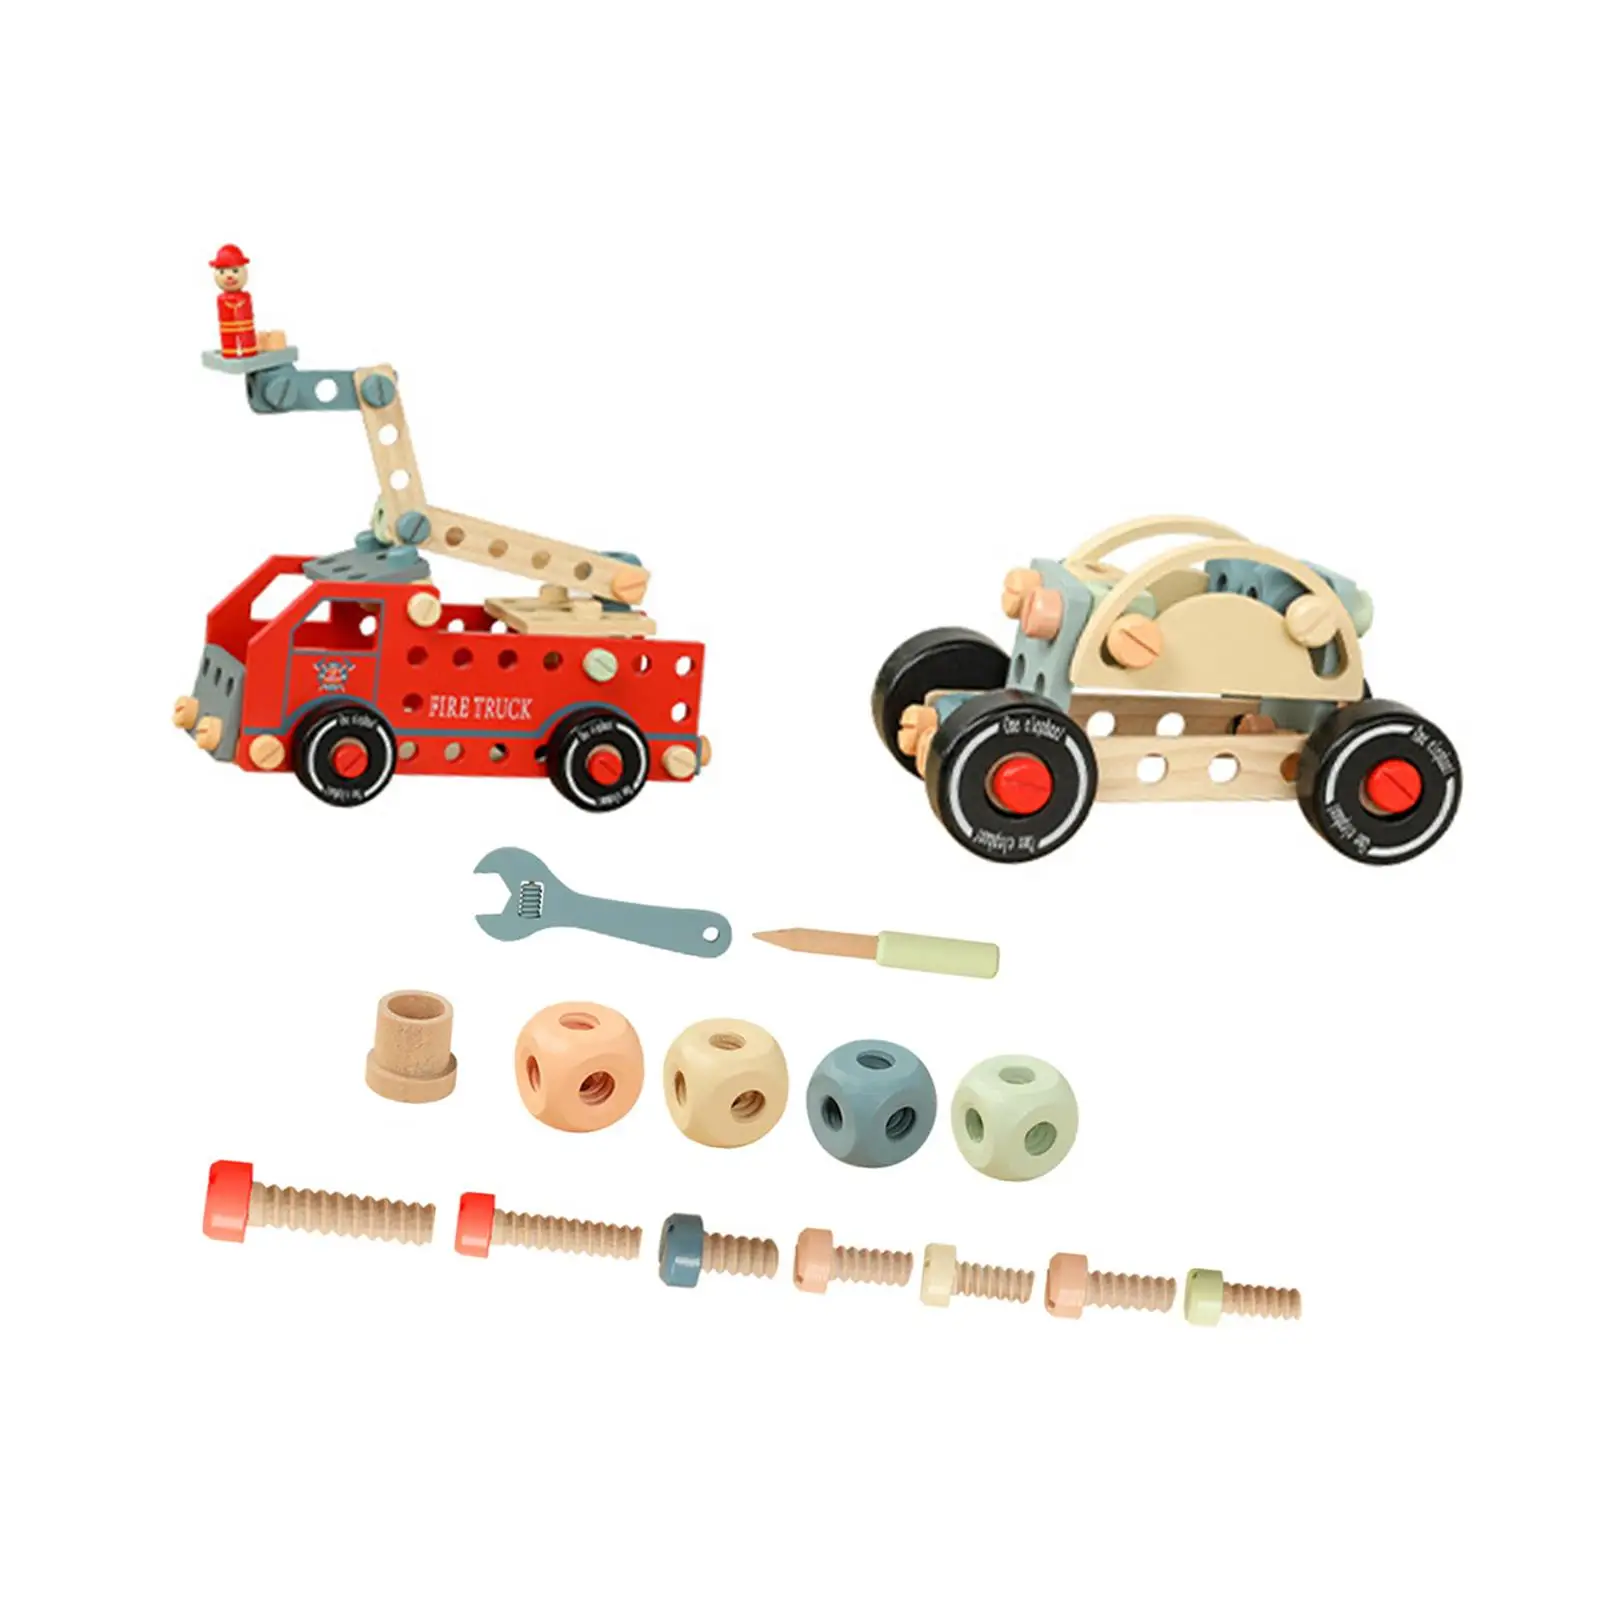 DIY Construction Toy Portable Hand Eye Coordination Fine Motor Skills Wooden Nut Tool for Indoor Education Learning Role Play